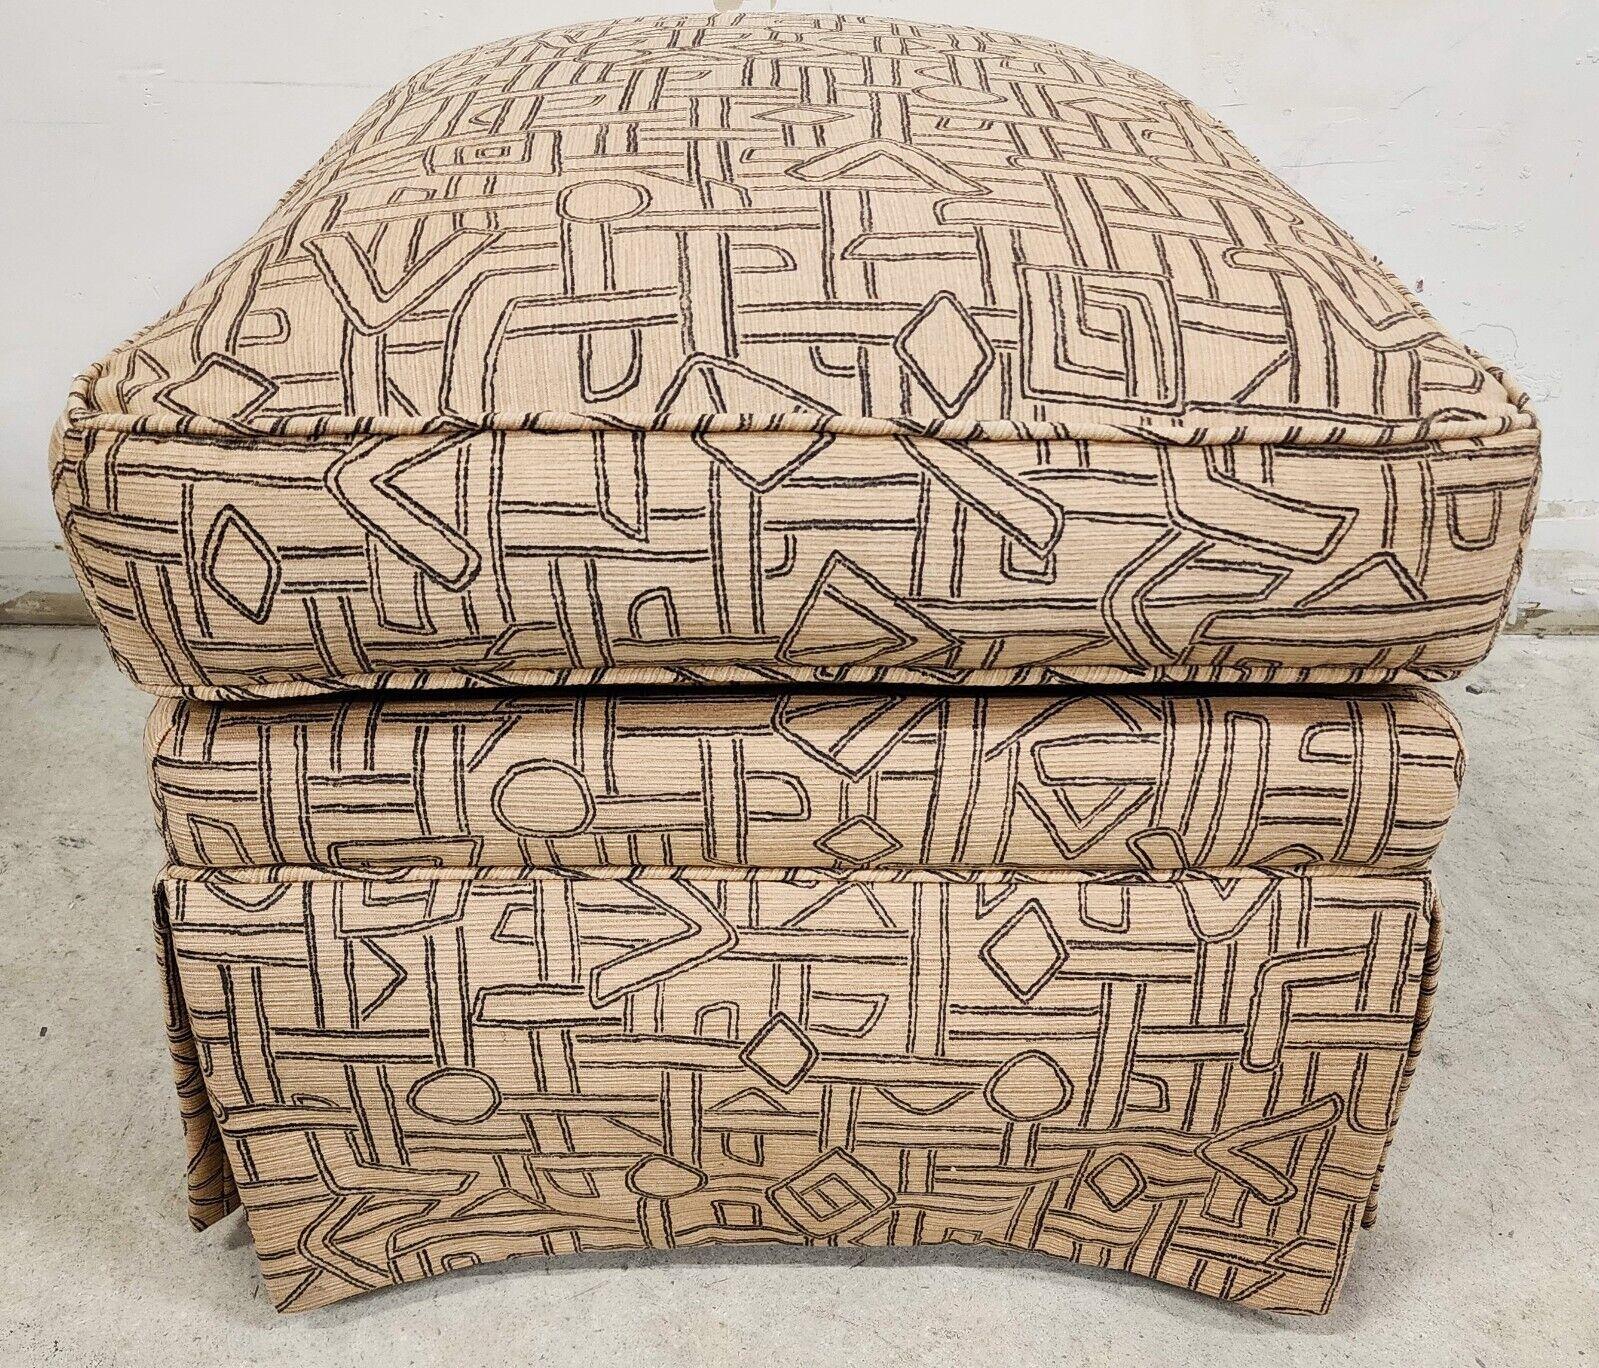 Raleigh Ottoman Geometric by CHARLES STEWART In Good Condition For Sale In Lake Worth, FL